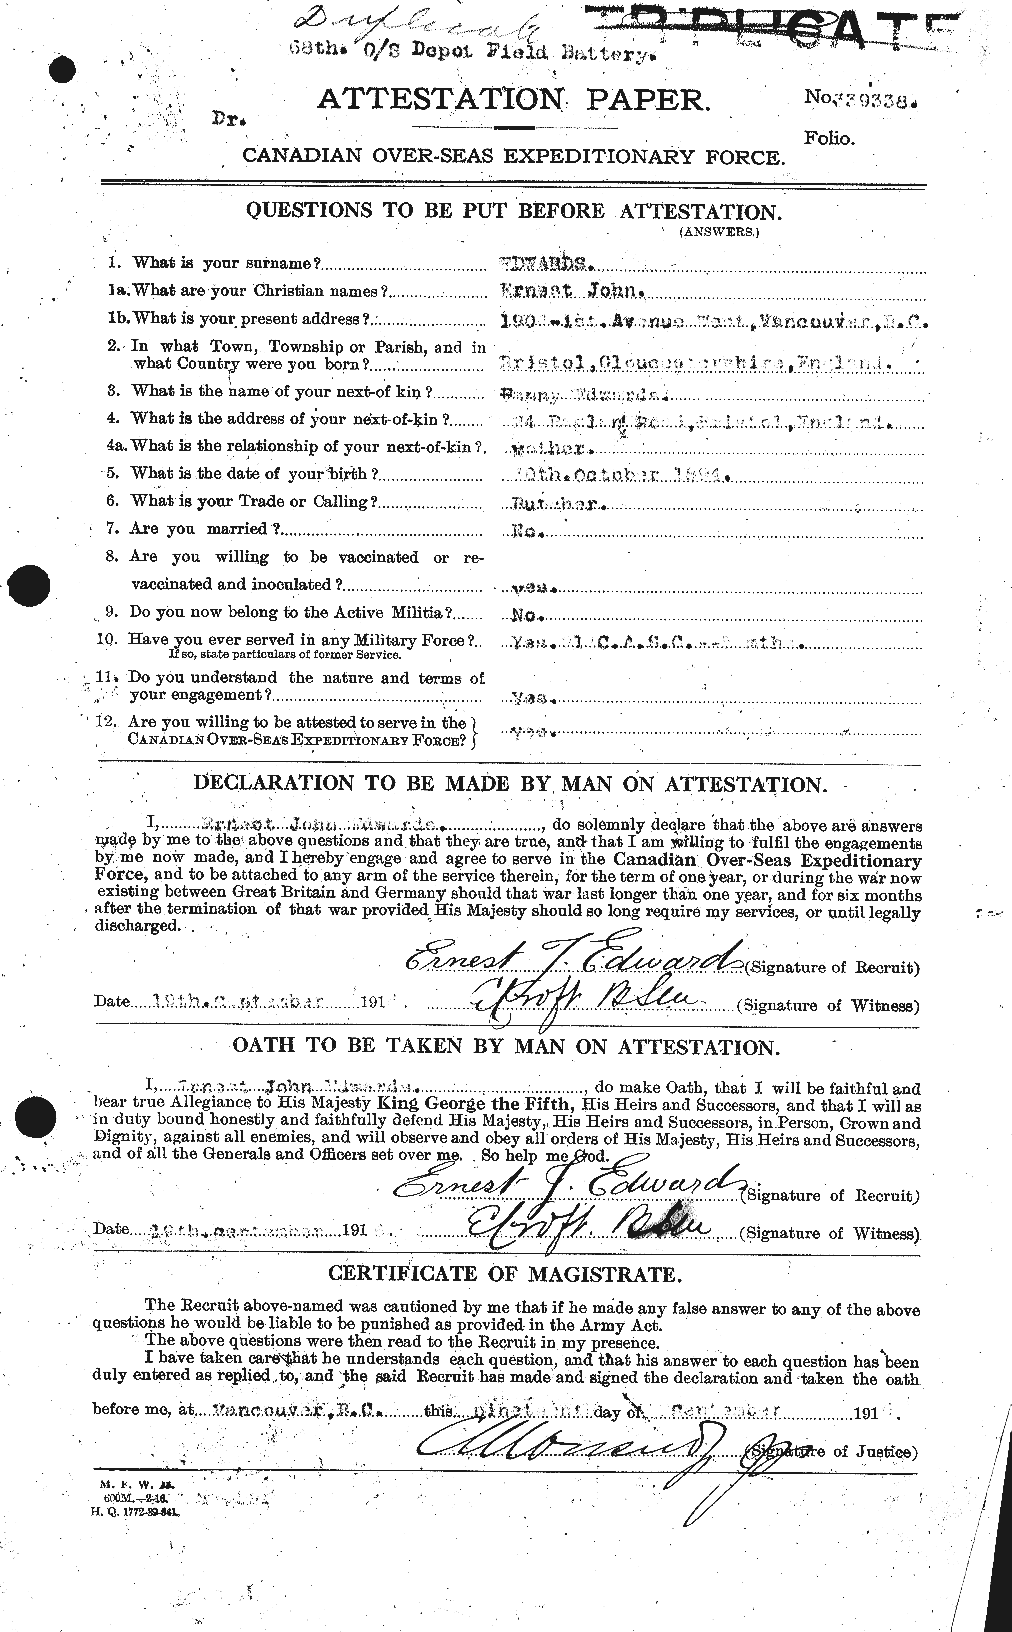 Personnel Records of the First World War - CEF 309012a